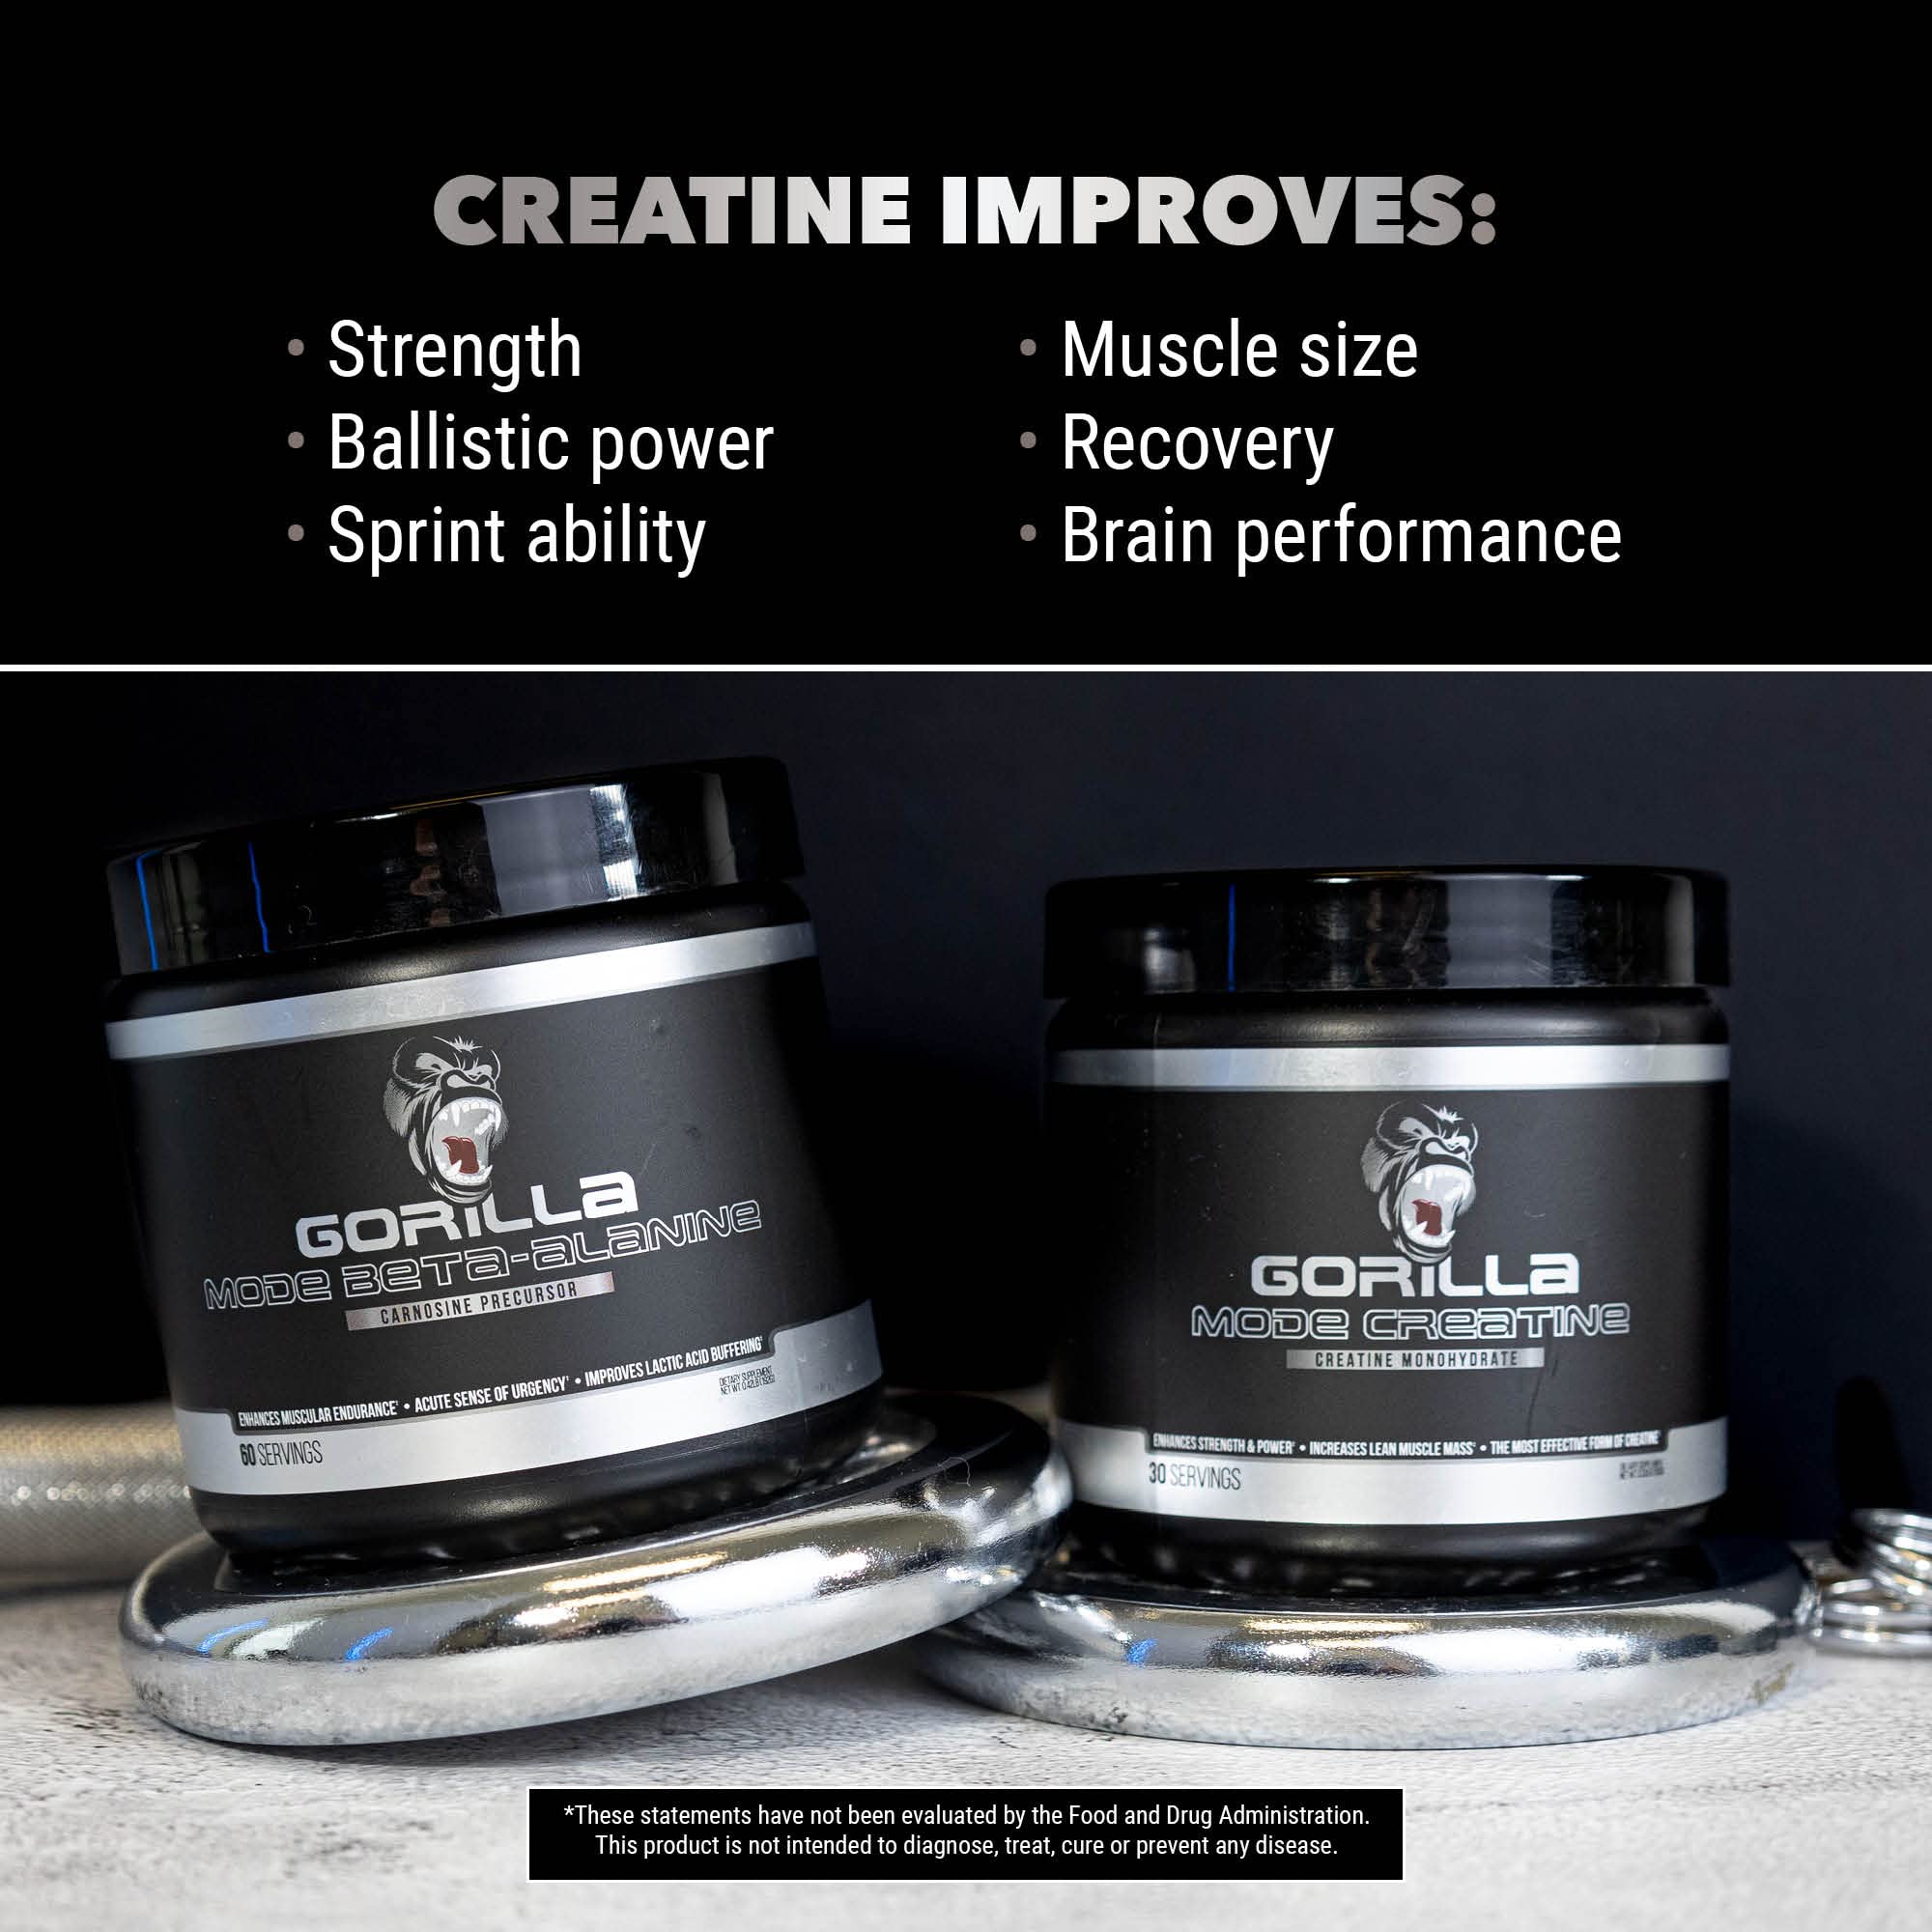 Gorilla Mind Gorilla Mode Creatine – Creatine Monohydrate Micronized Powder / Improved Muscle Size, Power Output and Strength / 5 Grams per Servings, 30 Servings